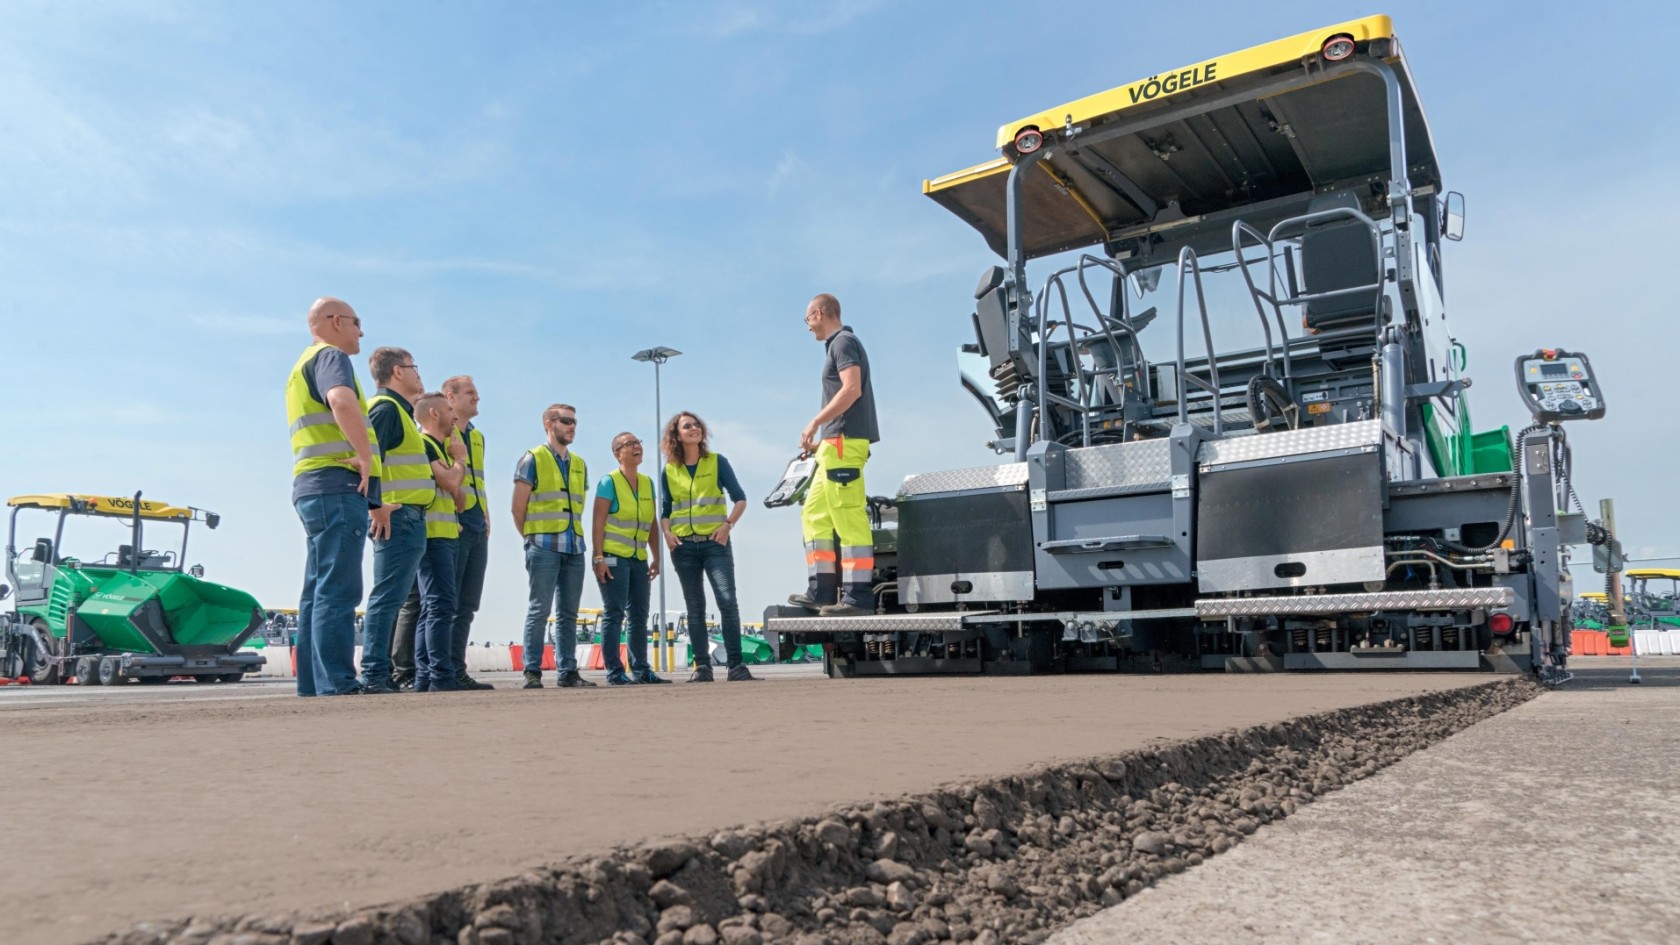 Training group with safety vests in front of Vögele paver